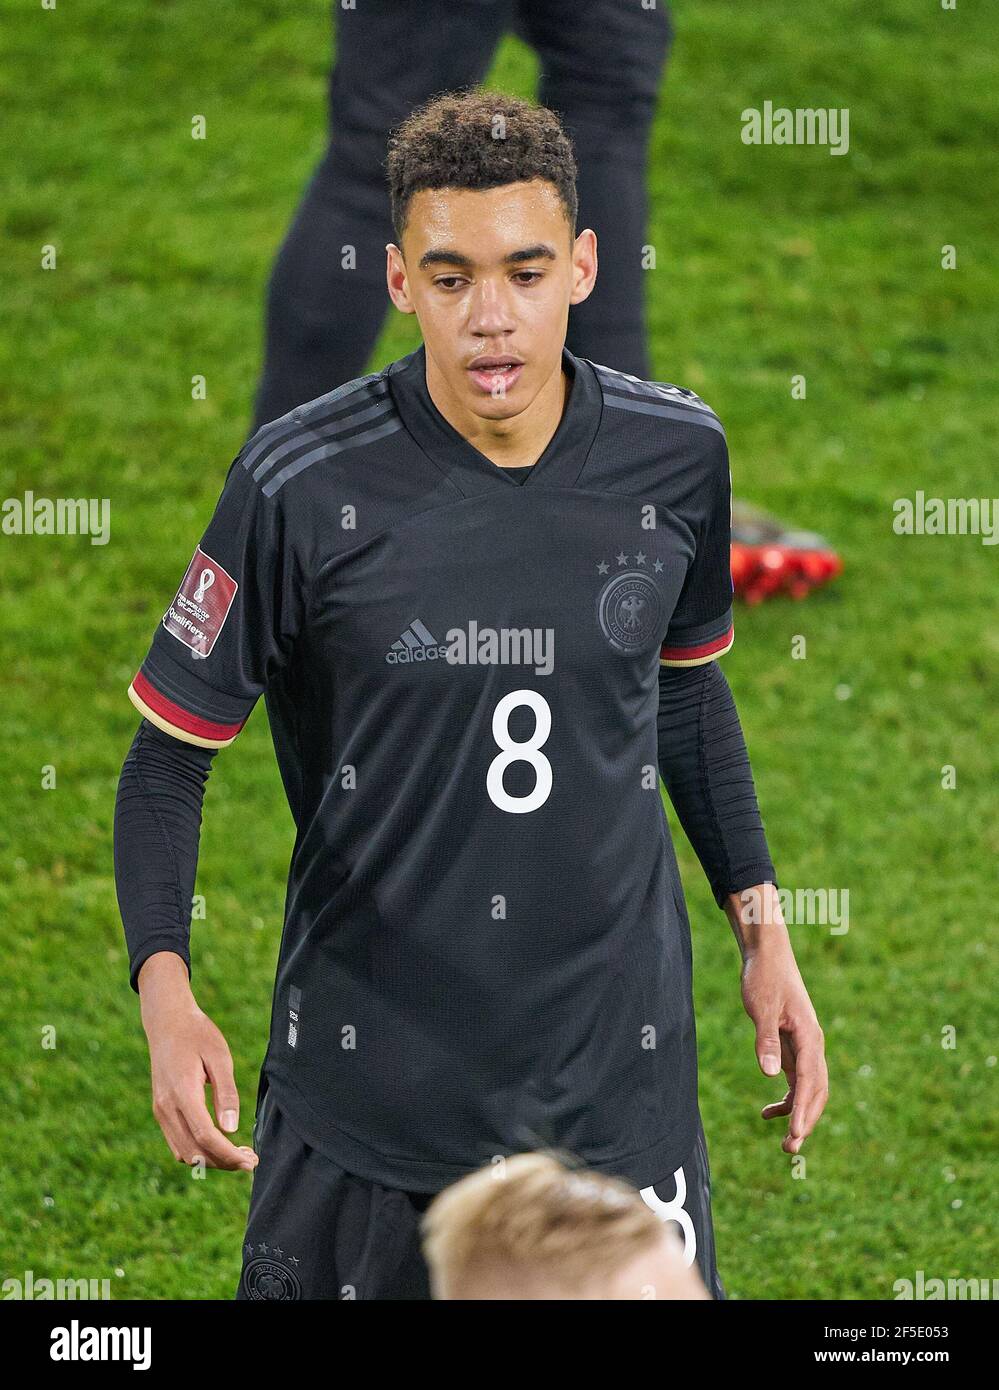 Jamal MUSIALA, DFB 8  half-size, portrait, one person, single, Aktion, Einzelbild, angeschnittenes Einzelmotiv, Halbfigur, halbe Figur,  in the match GERMANY - ICELAND 3-0 Deutschland - ISLAND 3-0 Qualification for World Championships, WM Quali, Season 2020/2021,  March 25, 2021  in Duisburg, Germany.  © Peter Schatz / Alamy Live News  Important: DFB regulations prohibit any use of photographs as image sequences and/or quasi-video. Stock Photo